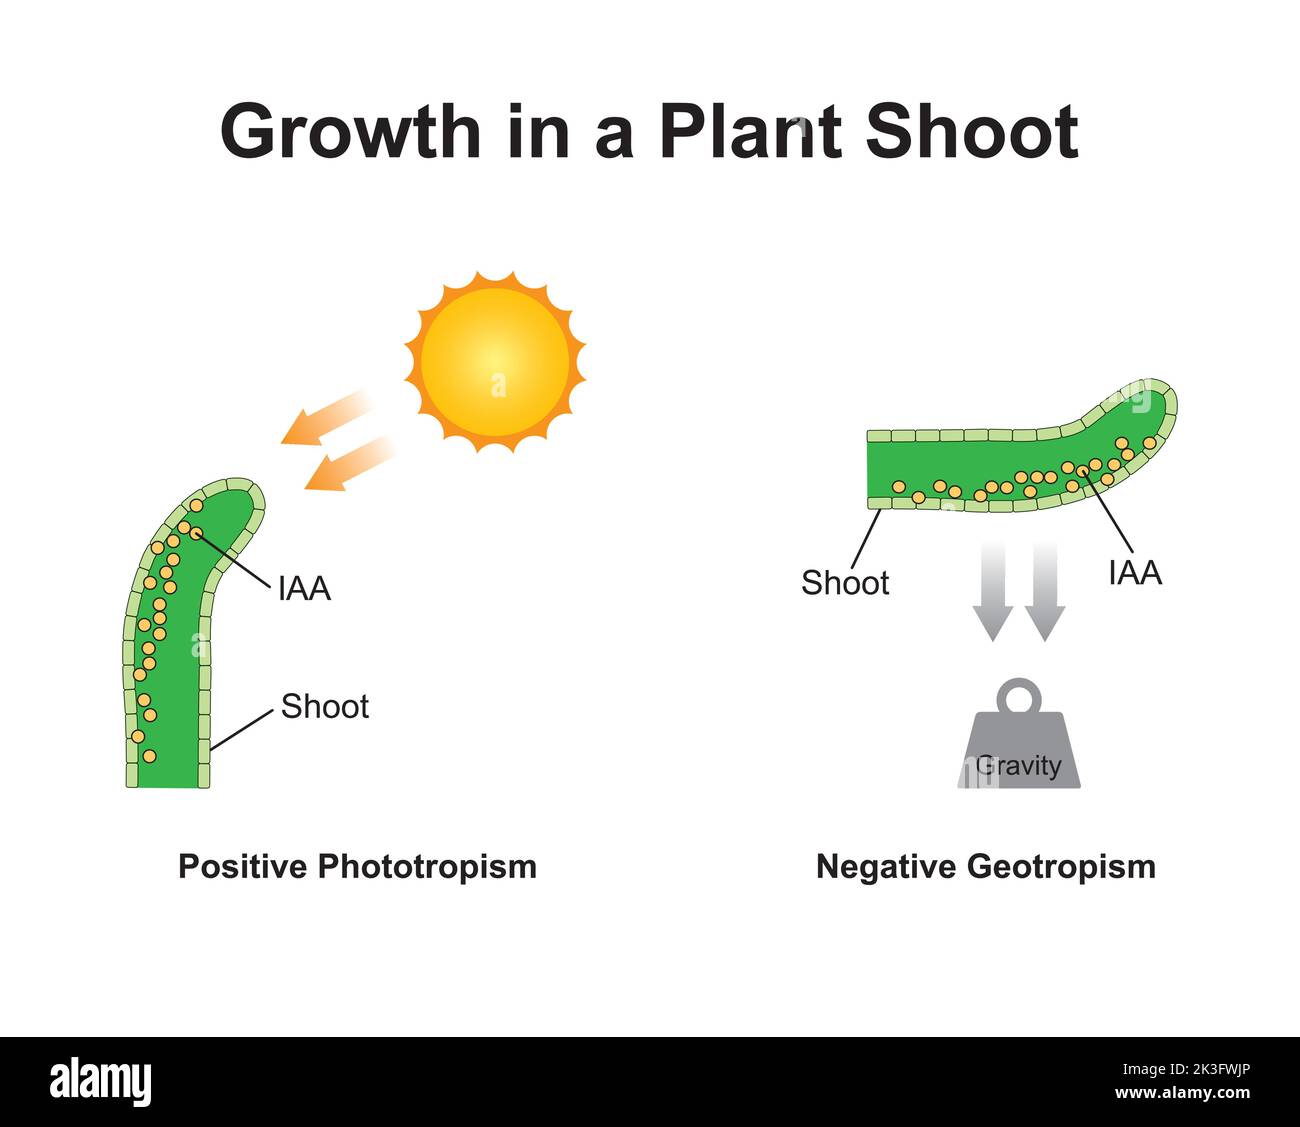 Scientific Designing of Growth in a Plant Shoot. Phototropism and Geotropism (Gravitropism) Effect on Plant Tissue. Colorful Symbols. Vector Illustrat Stock Vector